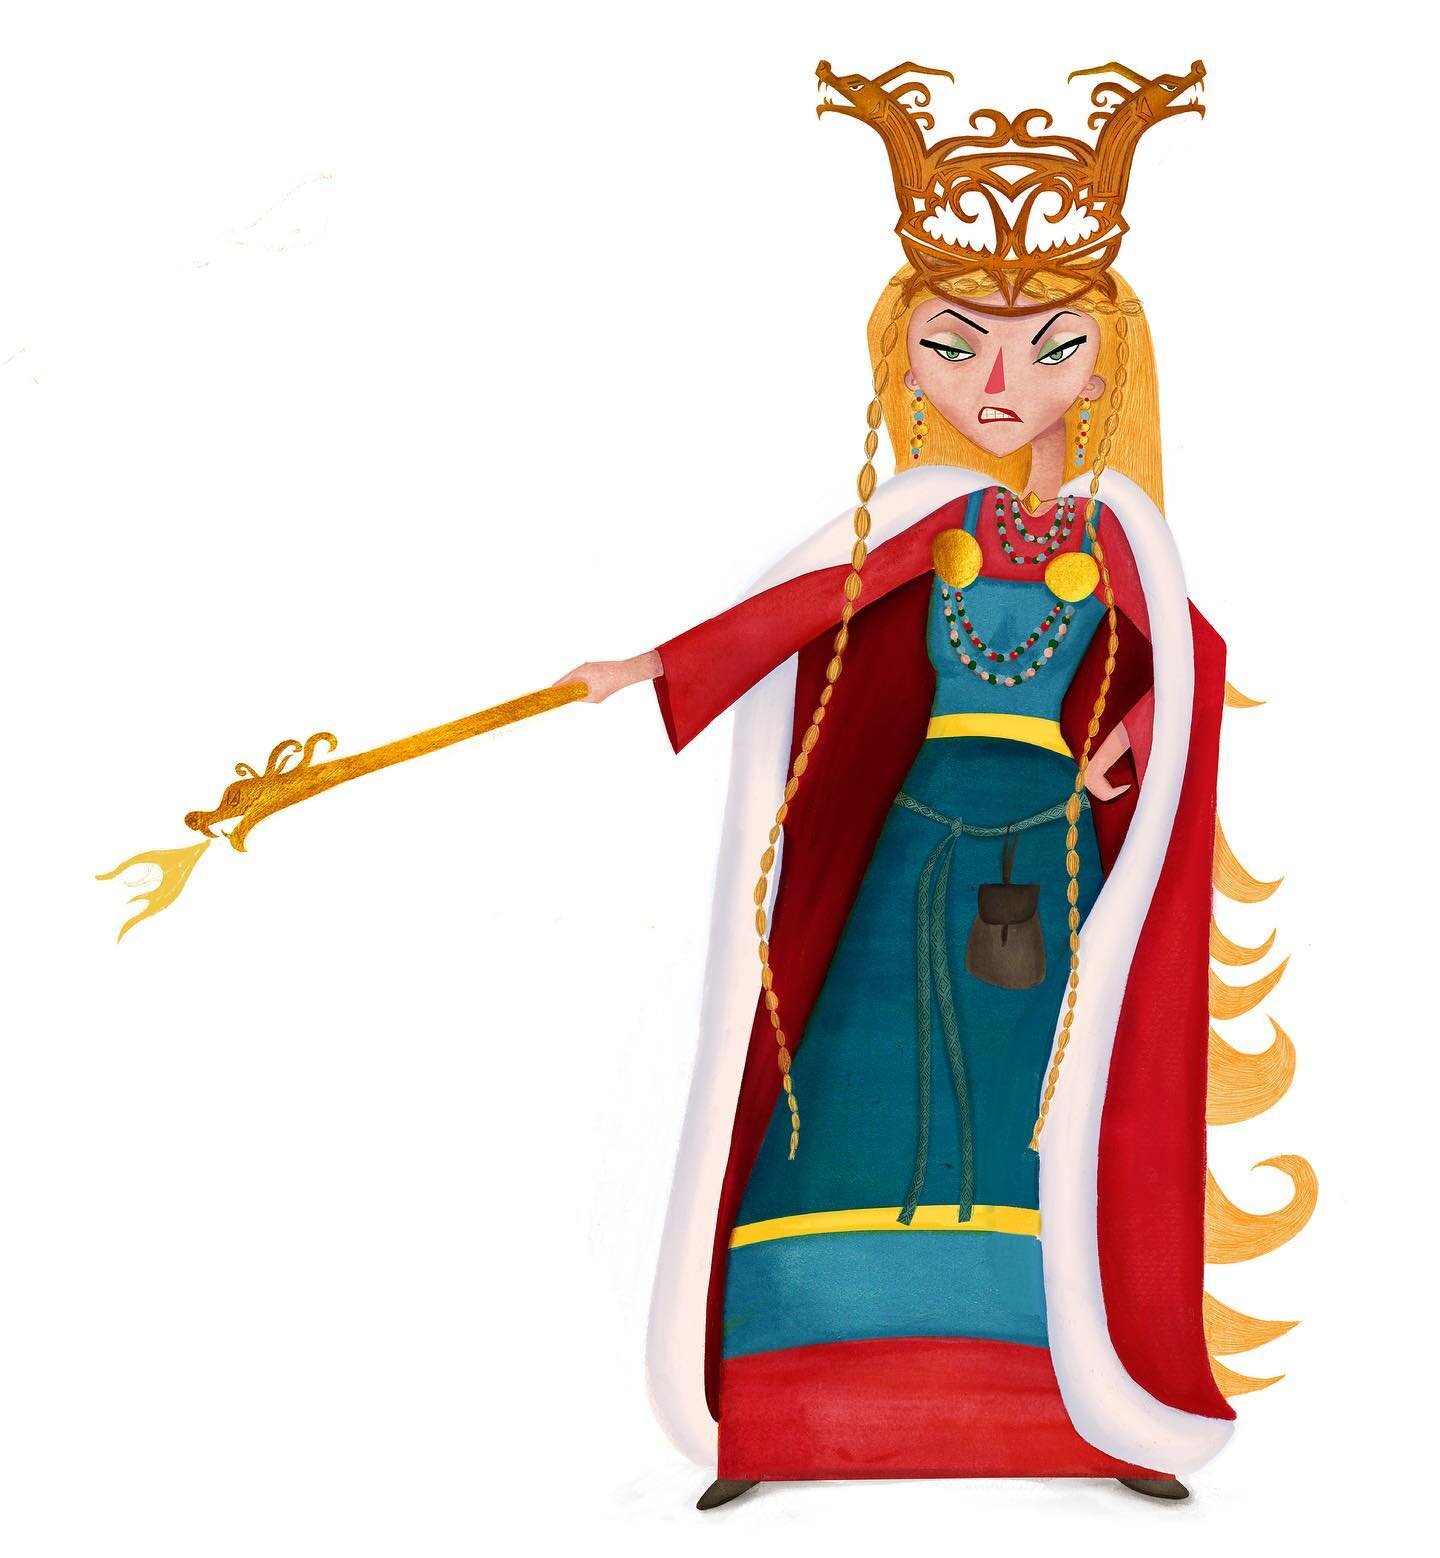 Illustrating Snow white&rsquo;s step mother as a Viking queen. 
.
.
.
#childrenbookillustration #kidsbookillustration